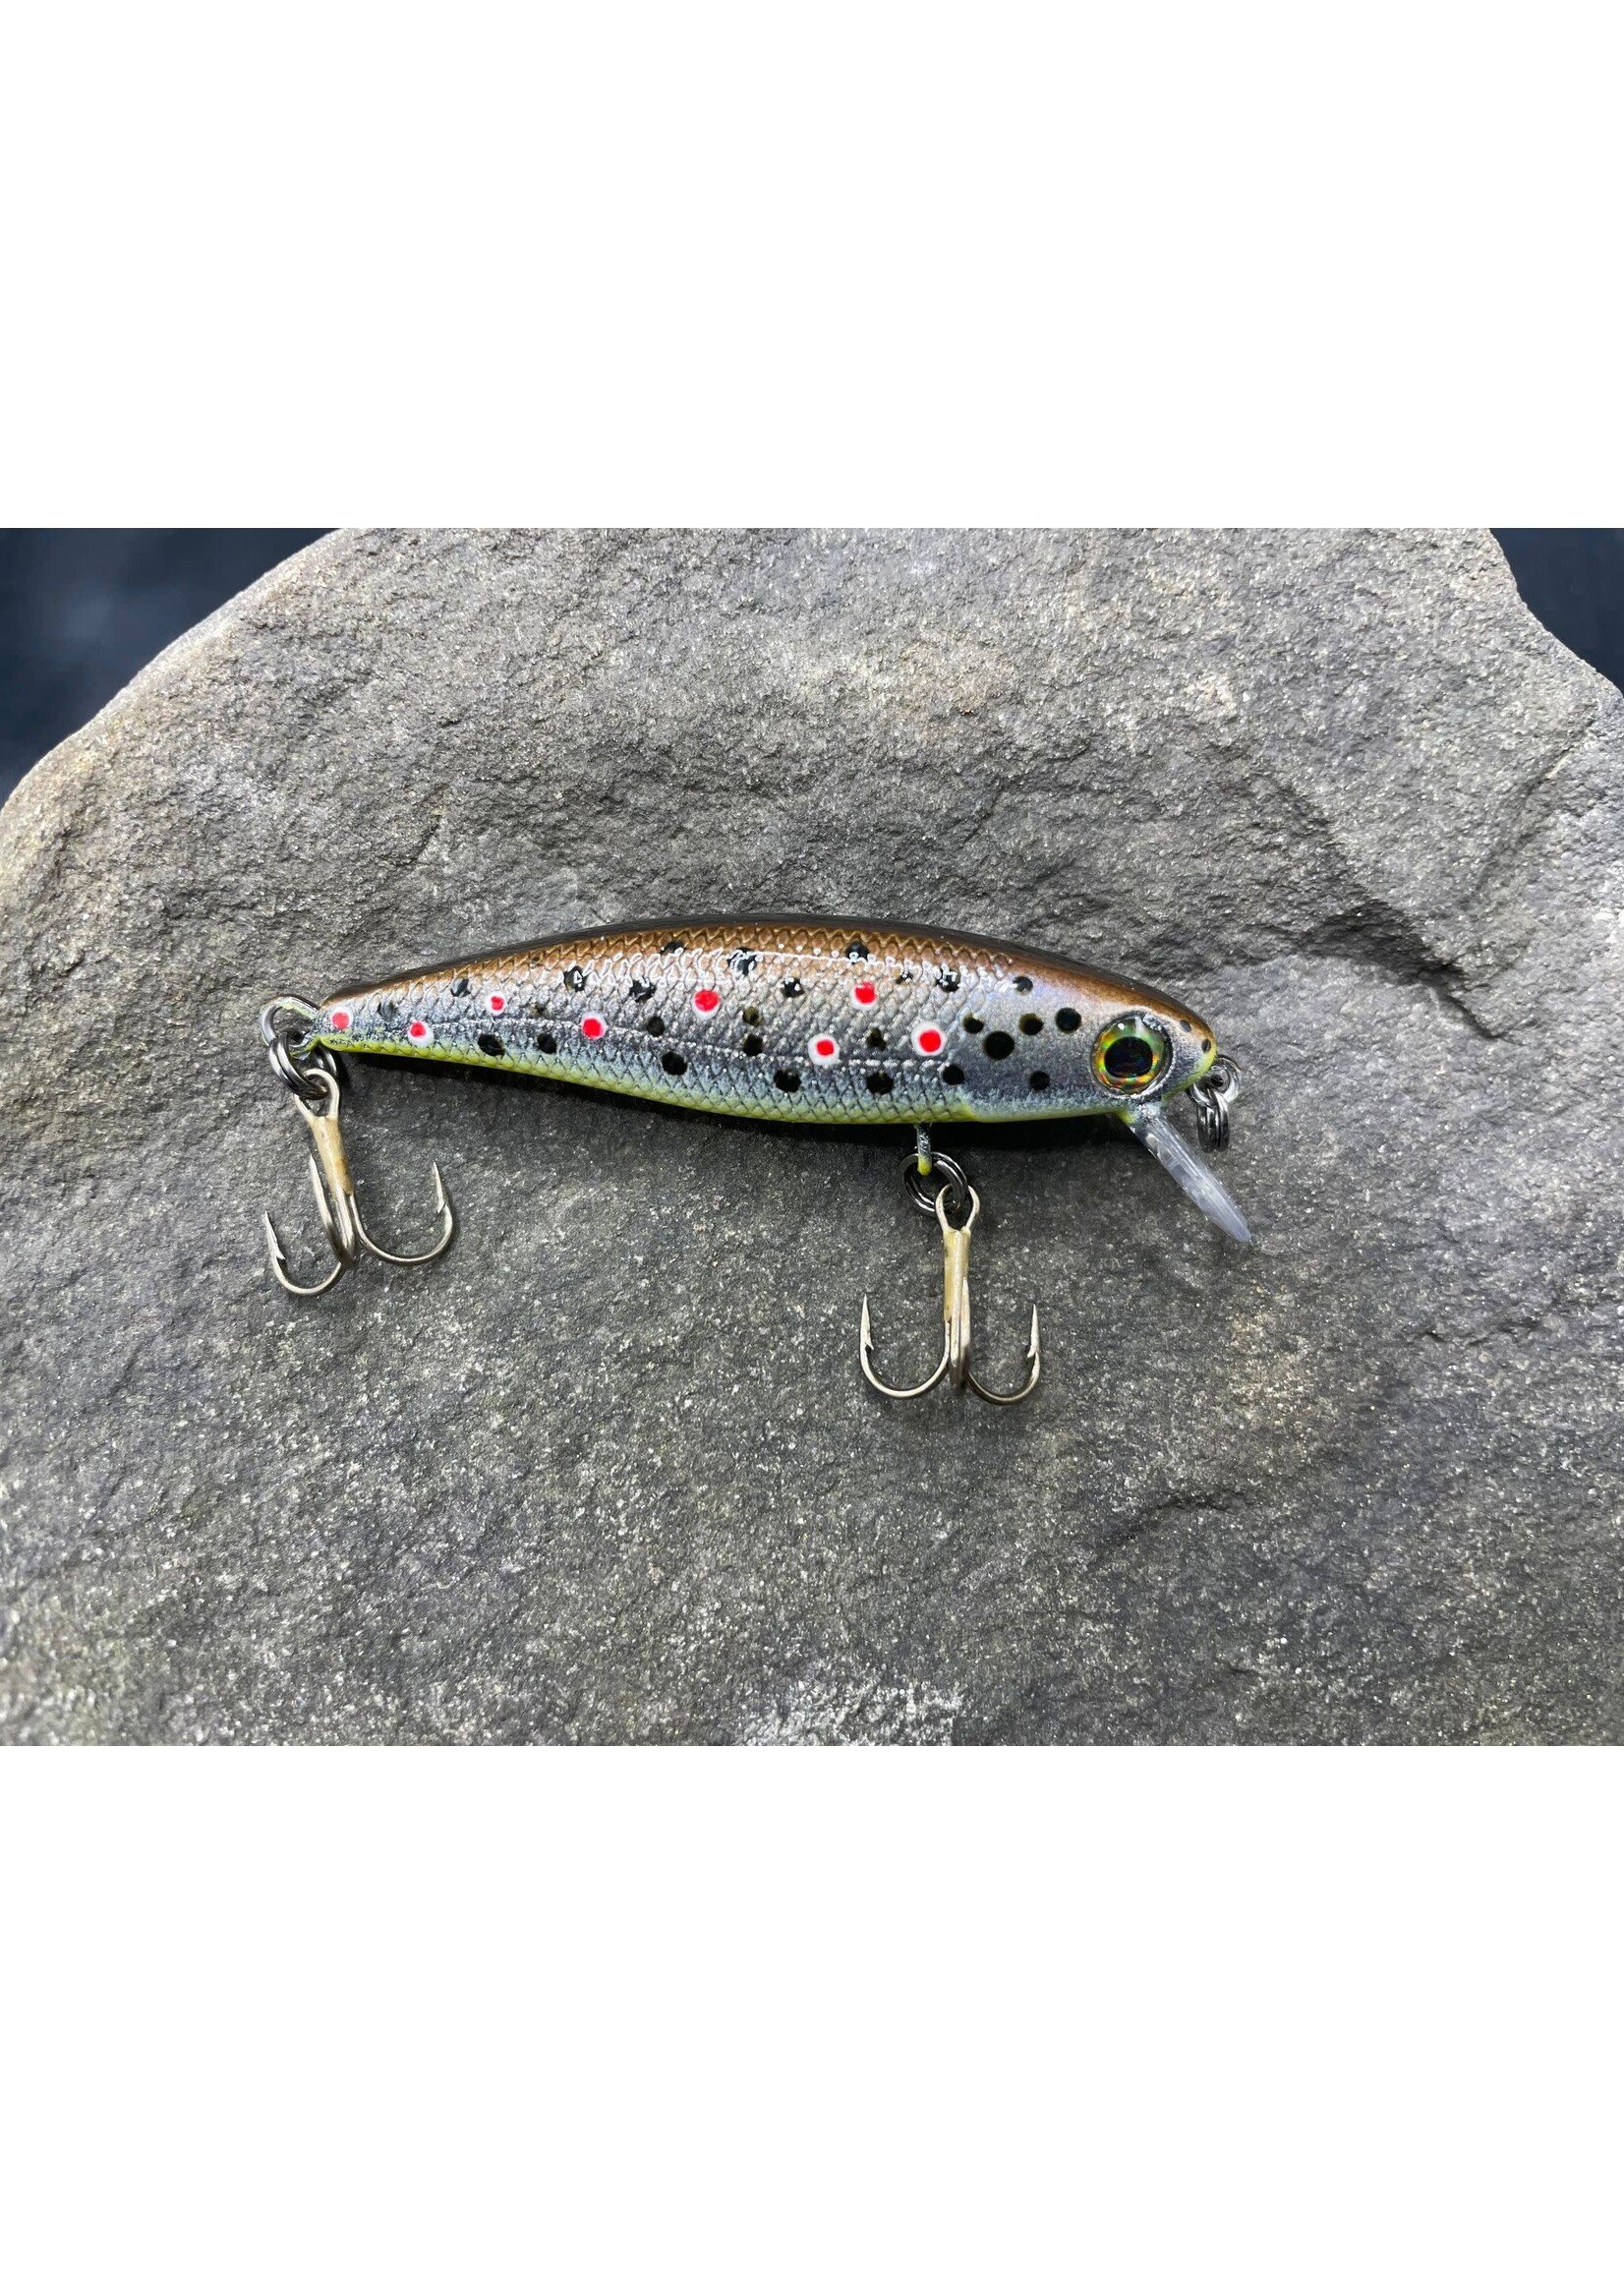 Custom Trout Spinners (How To Make A Custom Trout Spinner) 